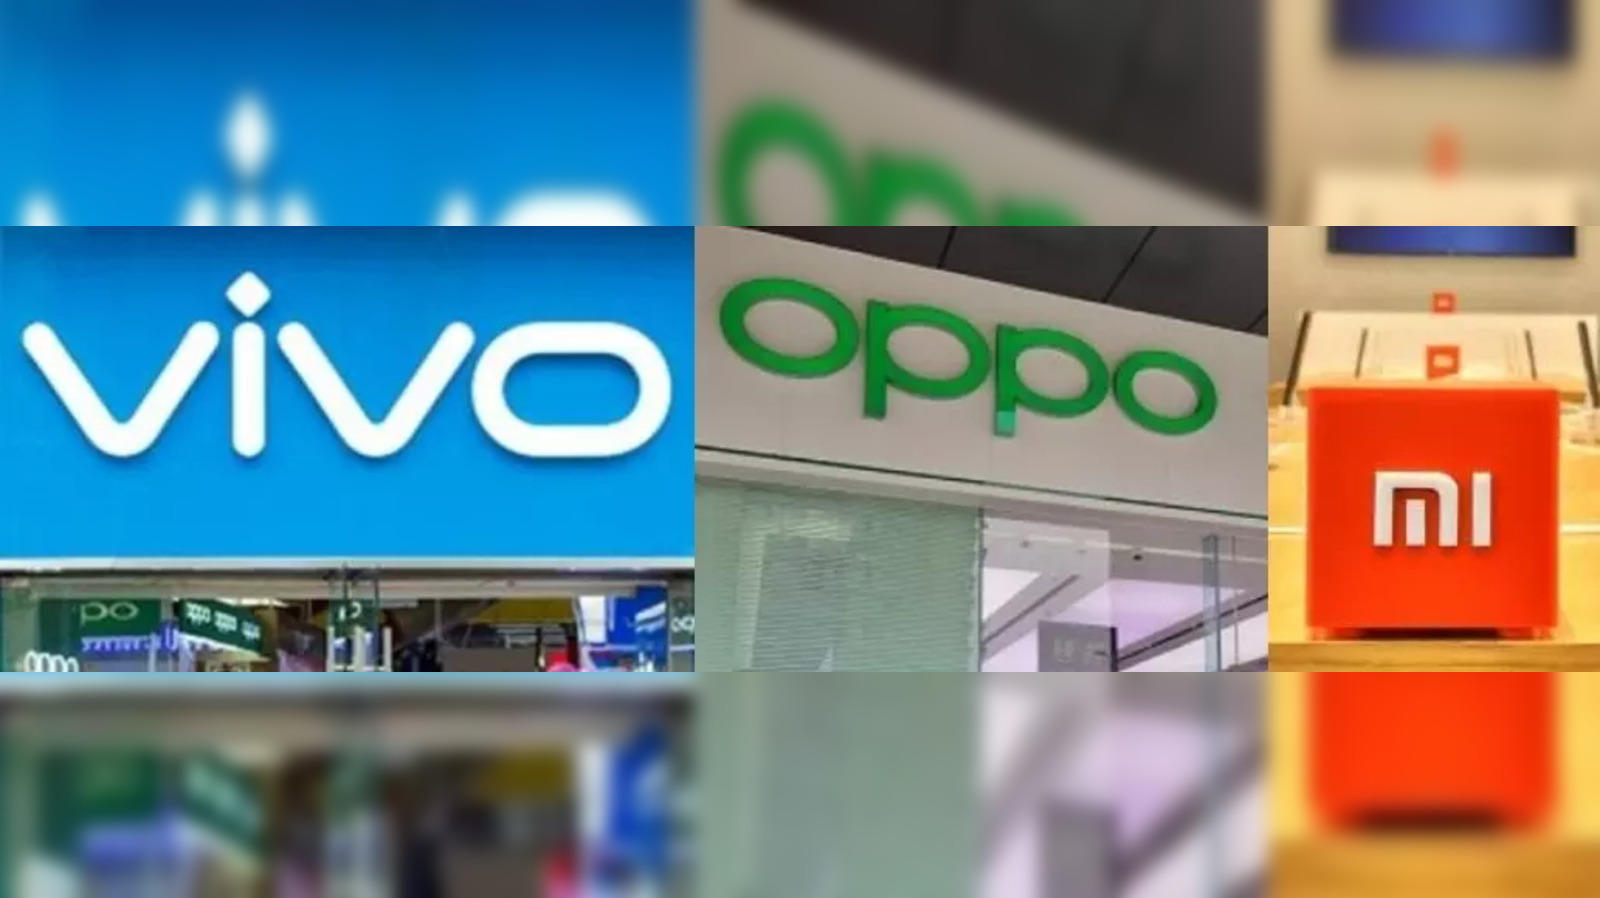 Louis Vuitton, Oppo to have own stores in India as FIPB gives clearance